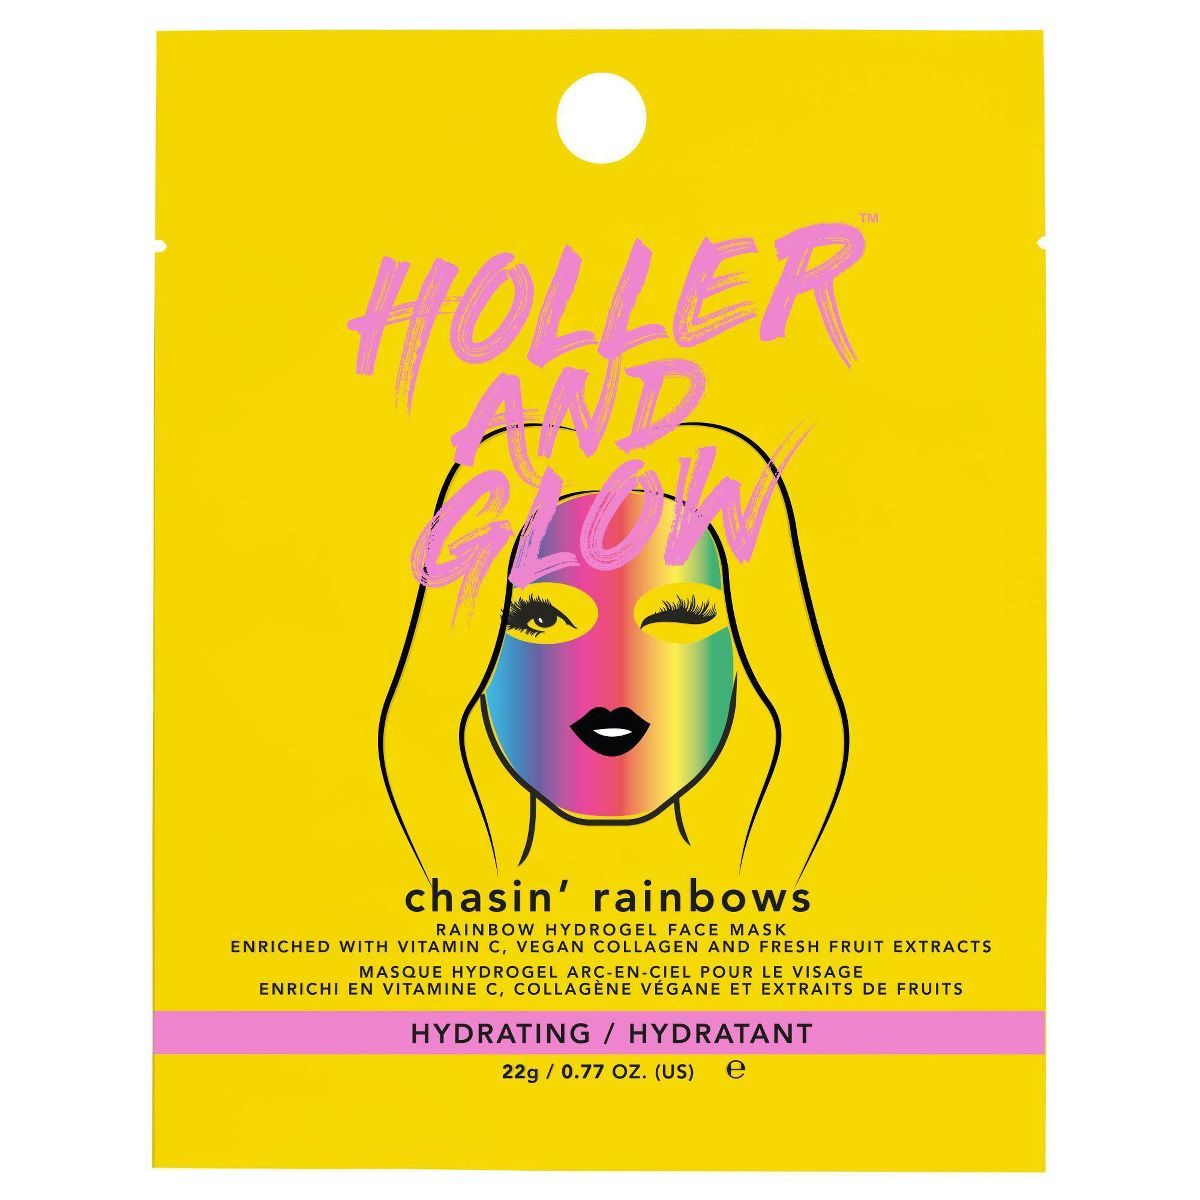 Holler and Glow Chasin Rainbows Hydrogel Face Mask - 0.77 fl oz | Target